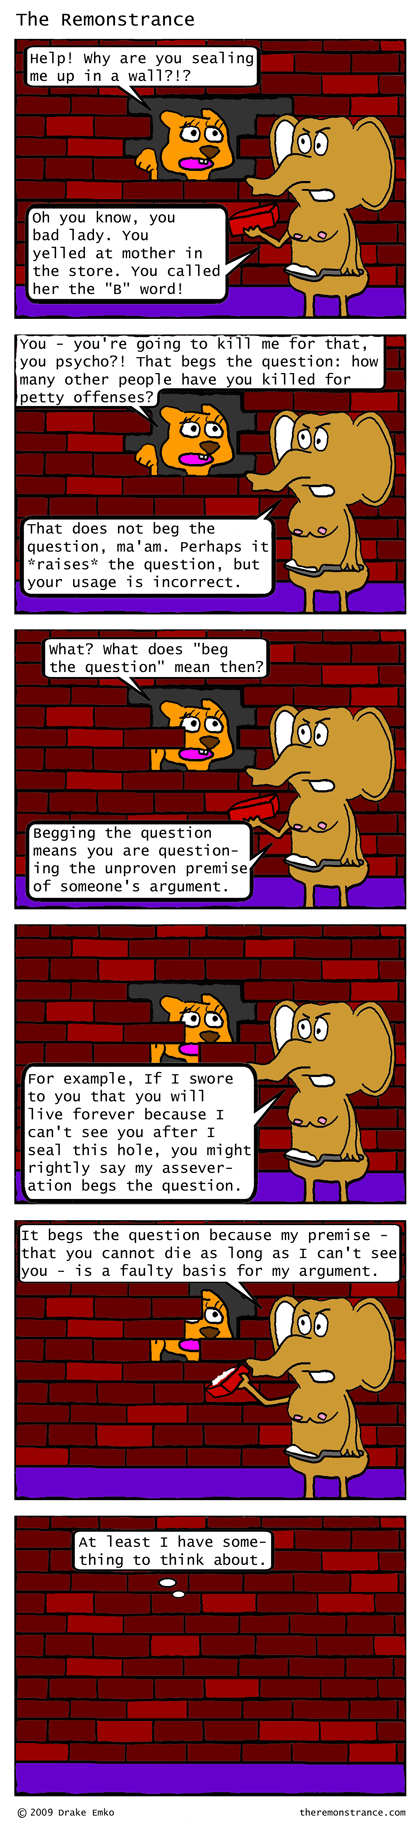 Begging the Question with Craisin - The Remonstrance comic for 2009-11-23. Word of the day: asseveration